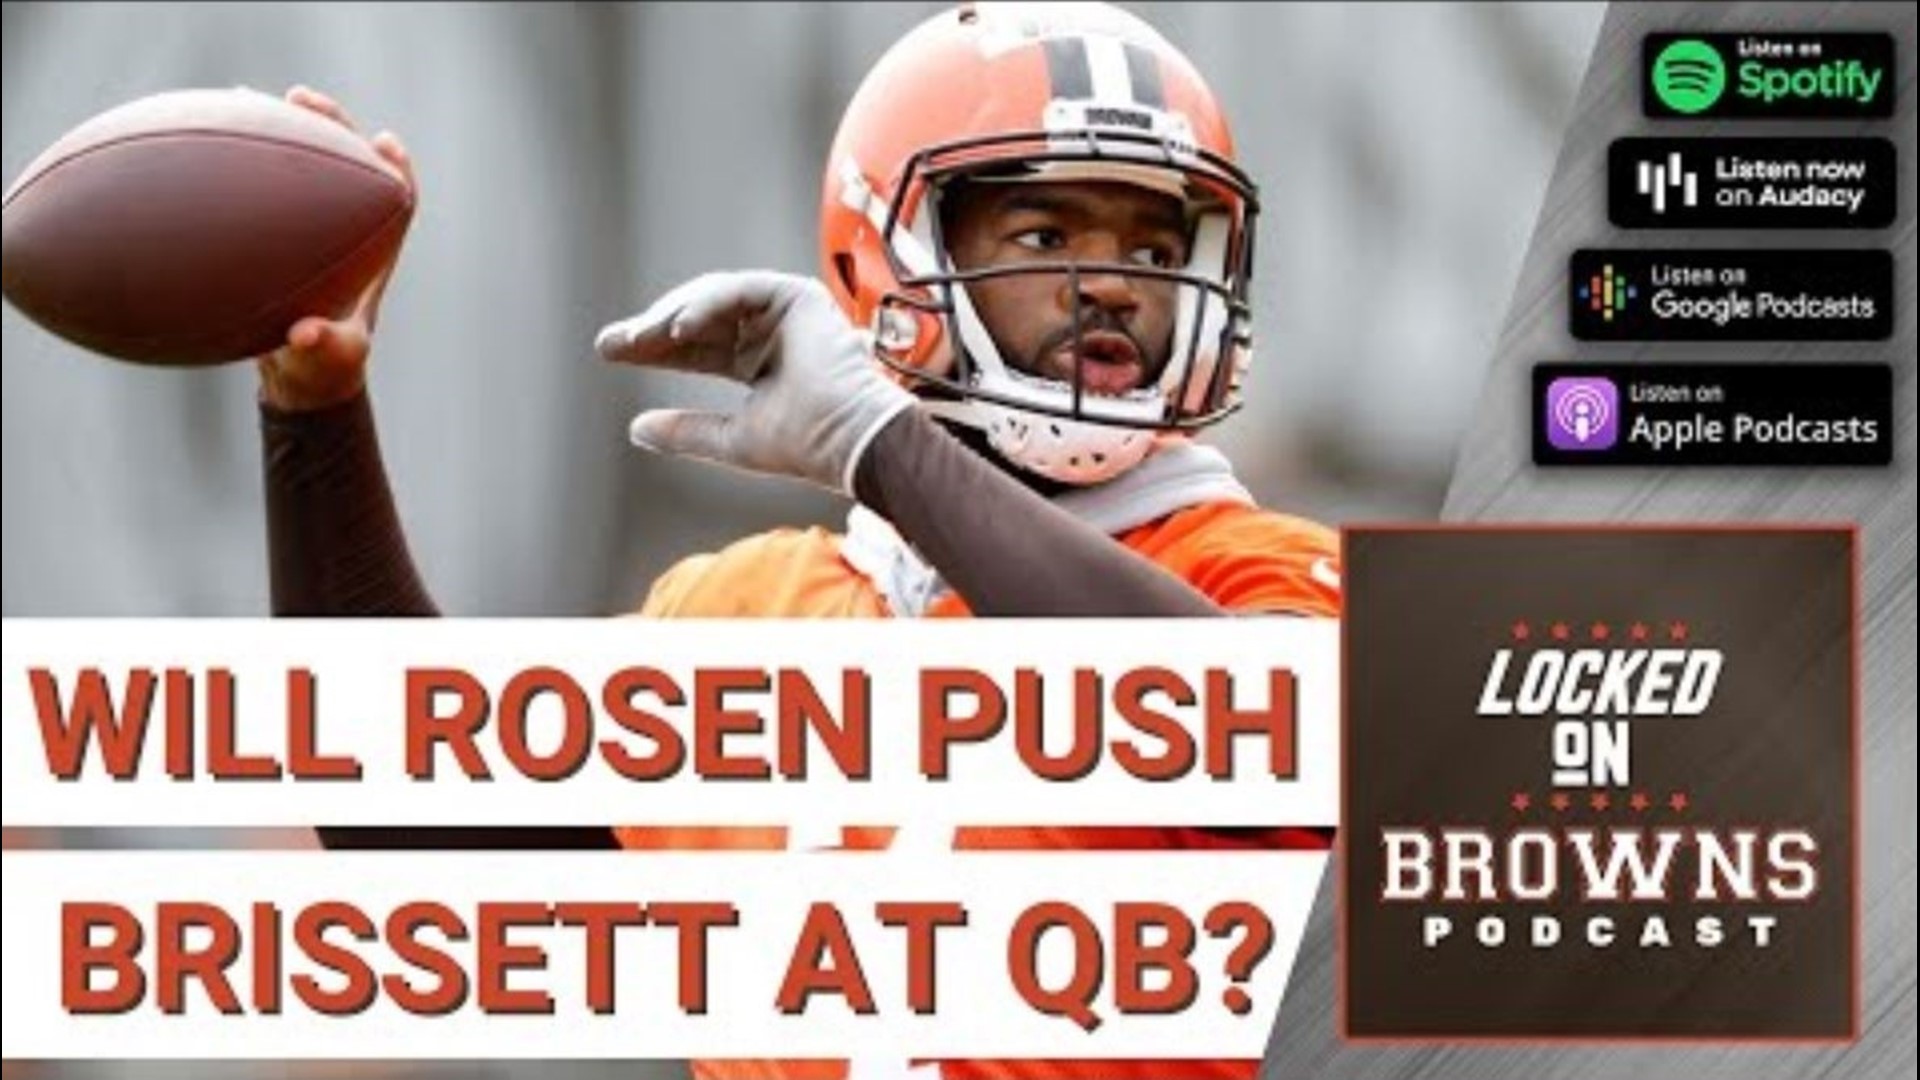 With Deshaun Watson likely to be suspended for at least part of the 2022 season, the Browns wanted to sign another quarterback to back up Jacoby Brissett.